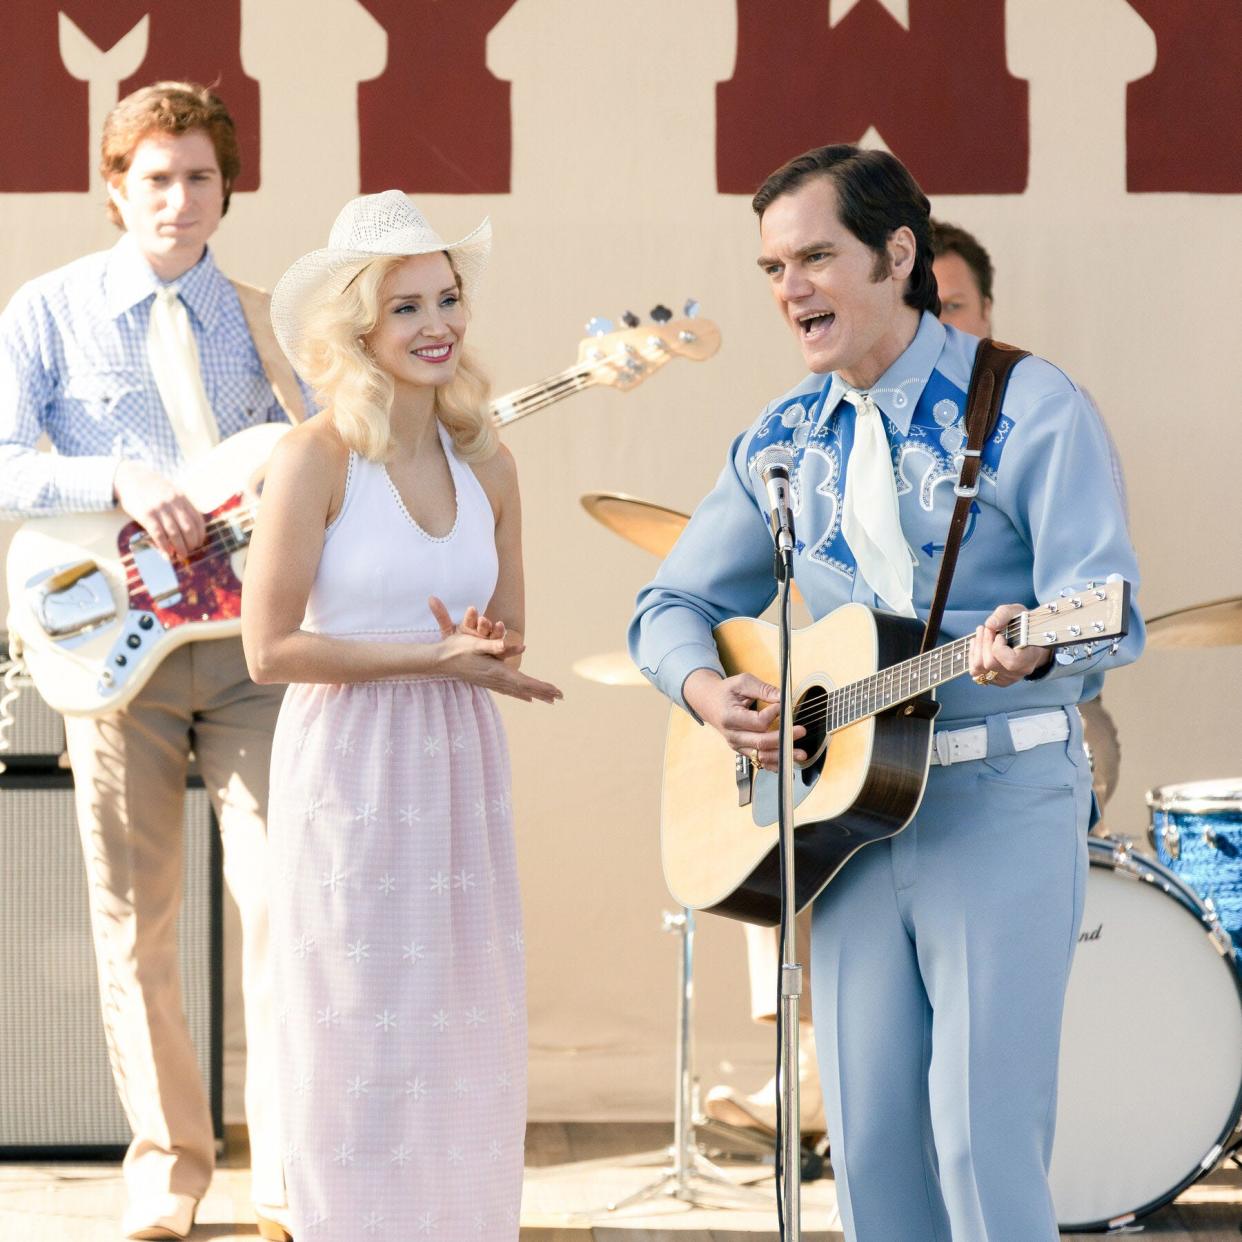 Jessica Chastain as Tammy Wynette and Michael Shannon as George Jones in the Showtime series "George & Tammy," which was shot in Wilmington.